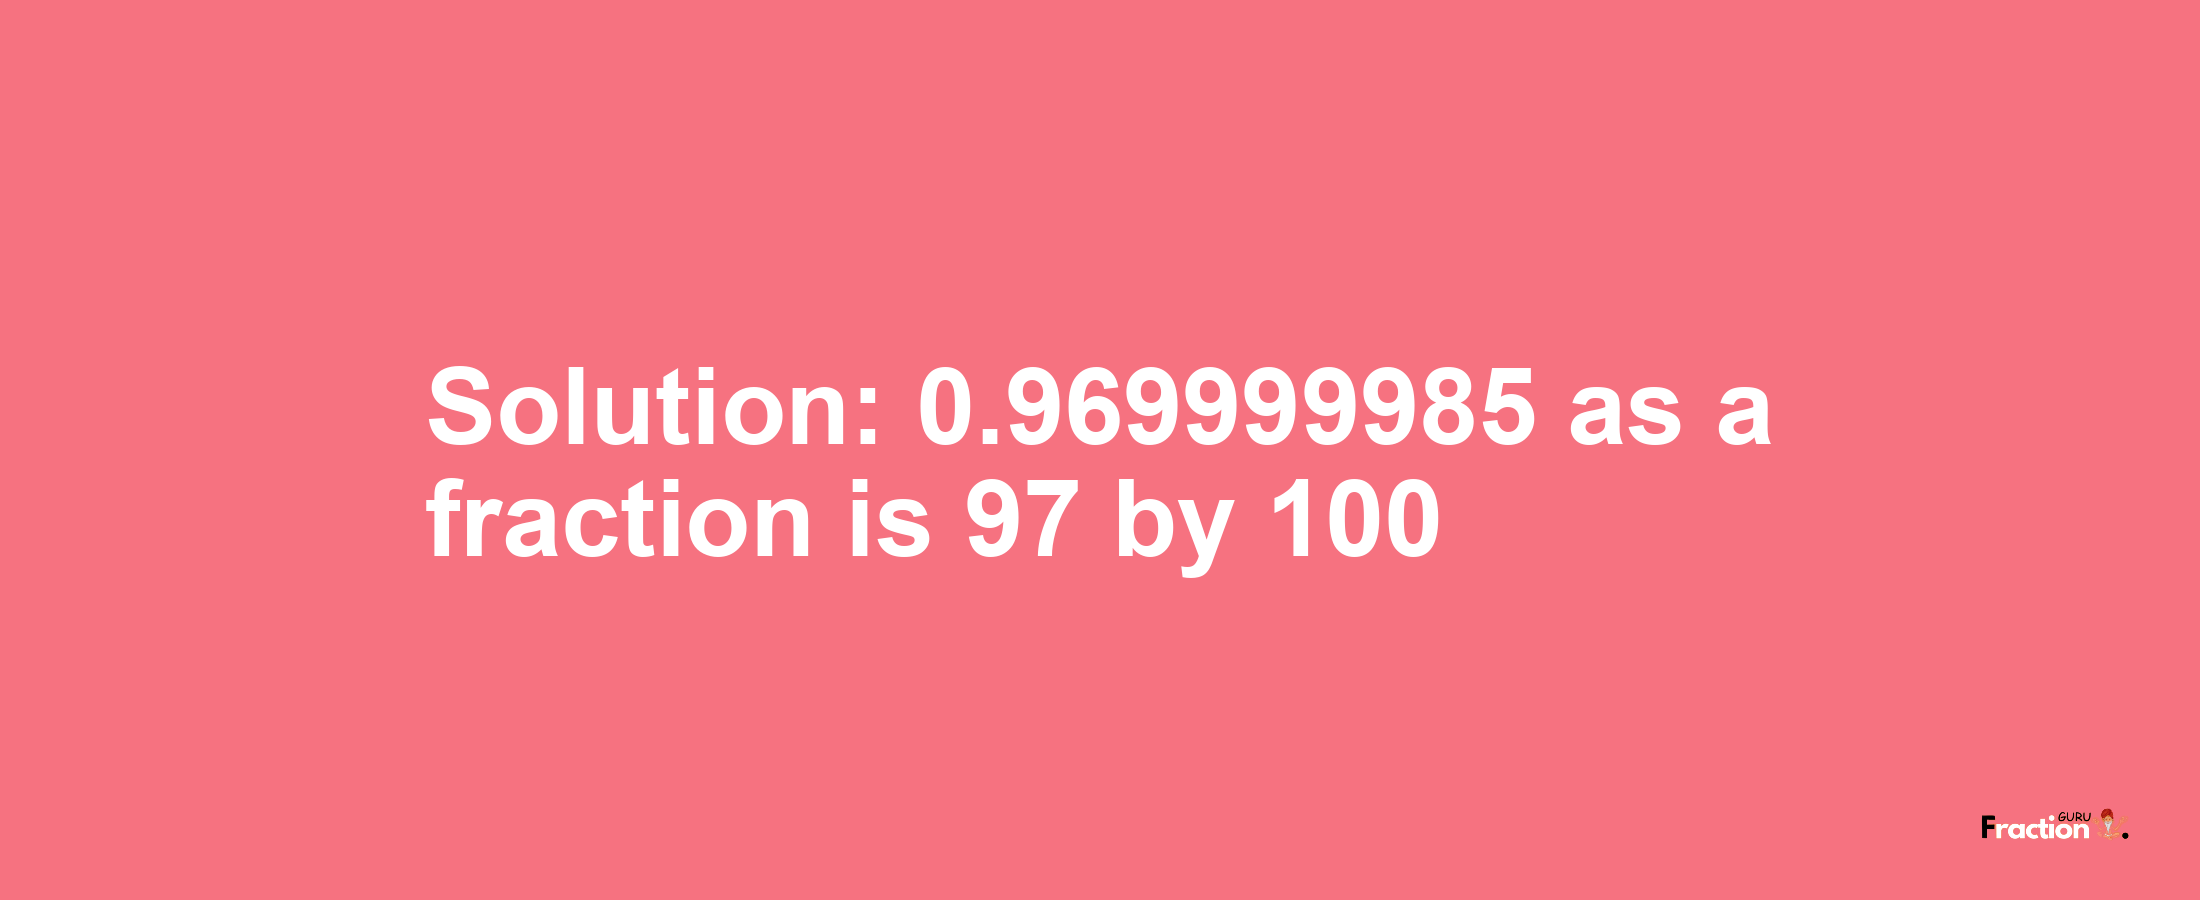 Solution:0.969999985 as a fraction is 97/100